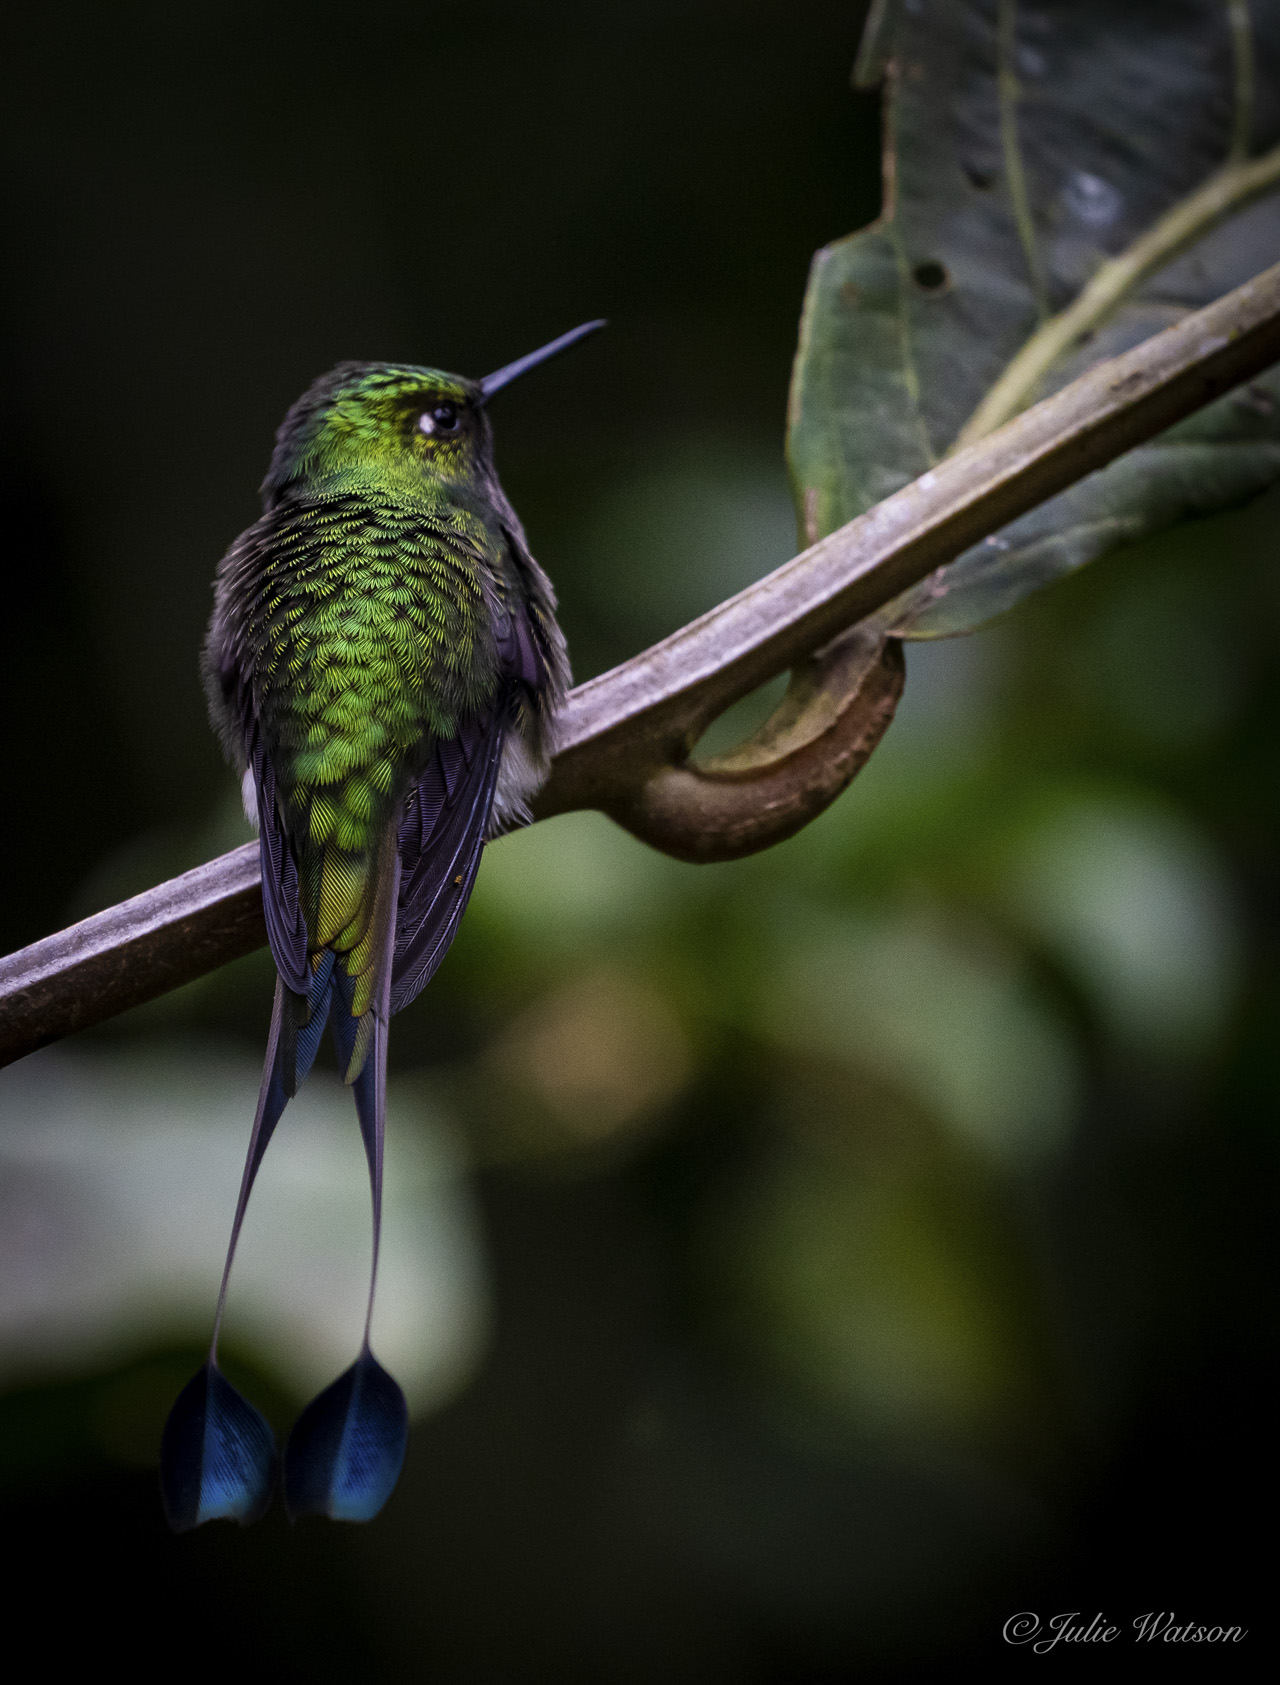 If you look closely at the back of a hummingbird 'Booted Racket-tail hummingbird' you will see a miniature forest of ferns, emerald green.